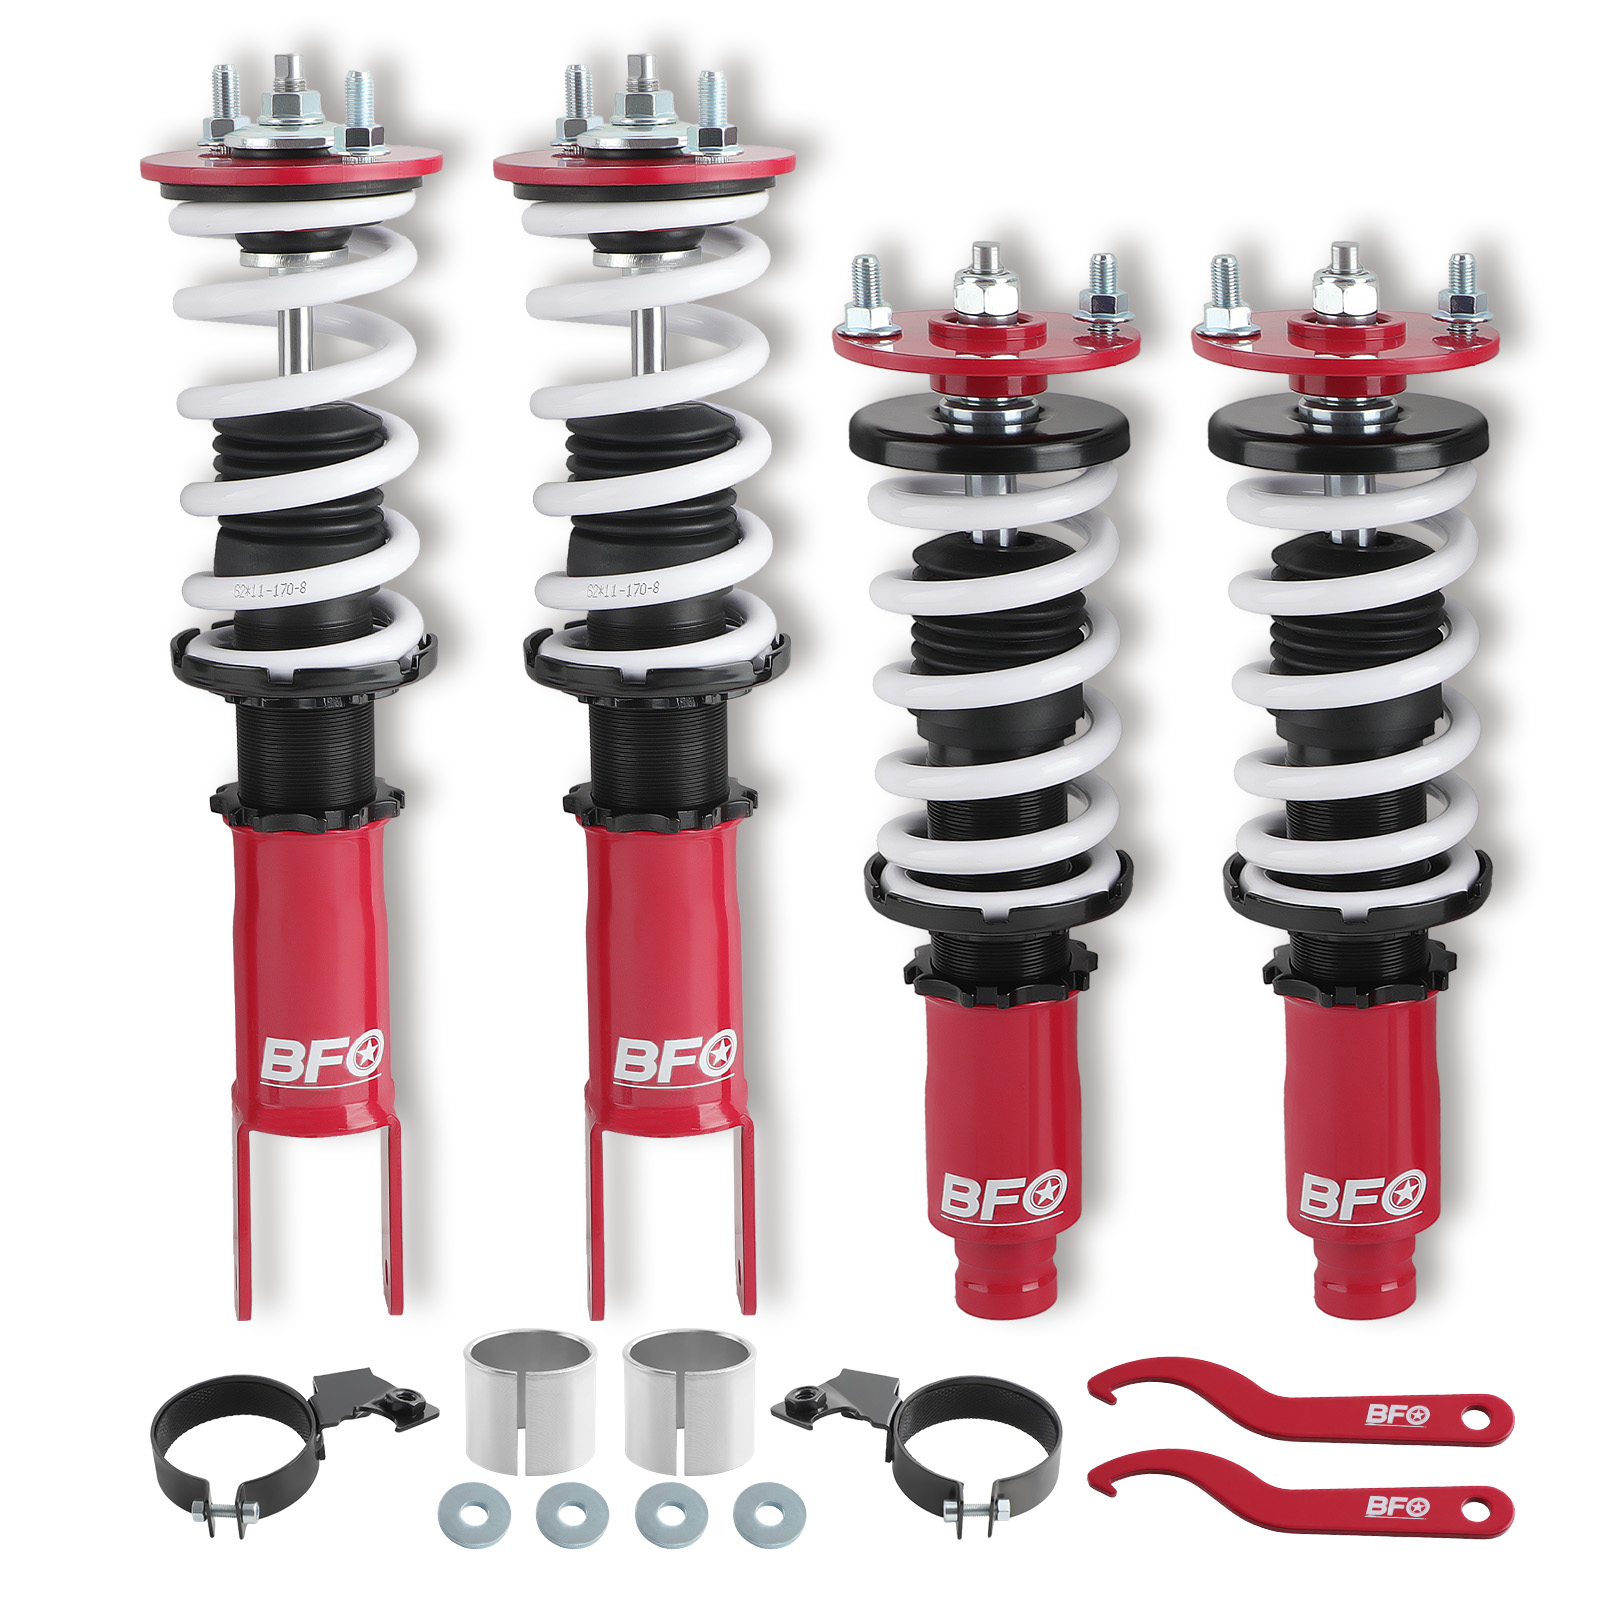 BFO Coilovers Coil Spring Shock Absorbers Kit For Honda Civic 1992-2000